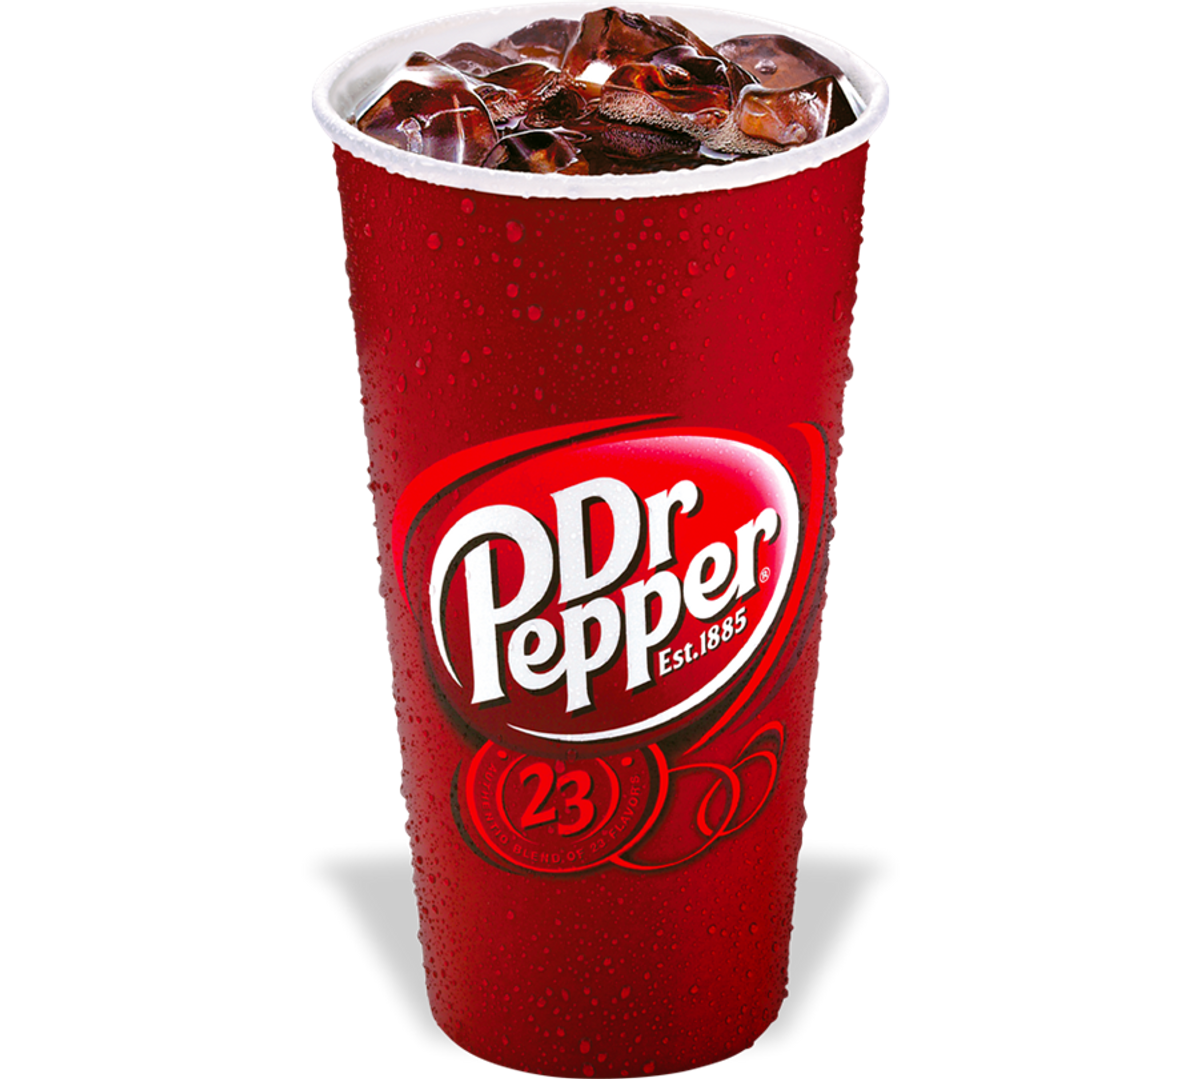 Ode To Dr. Pepper